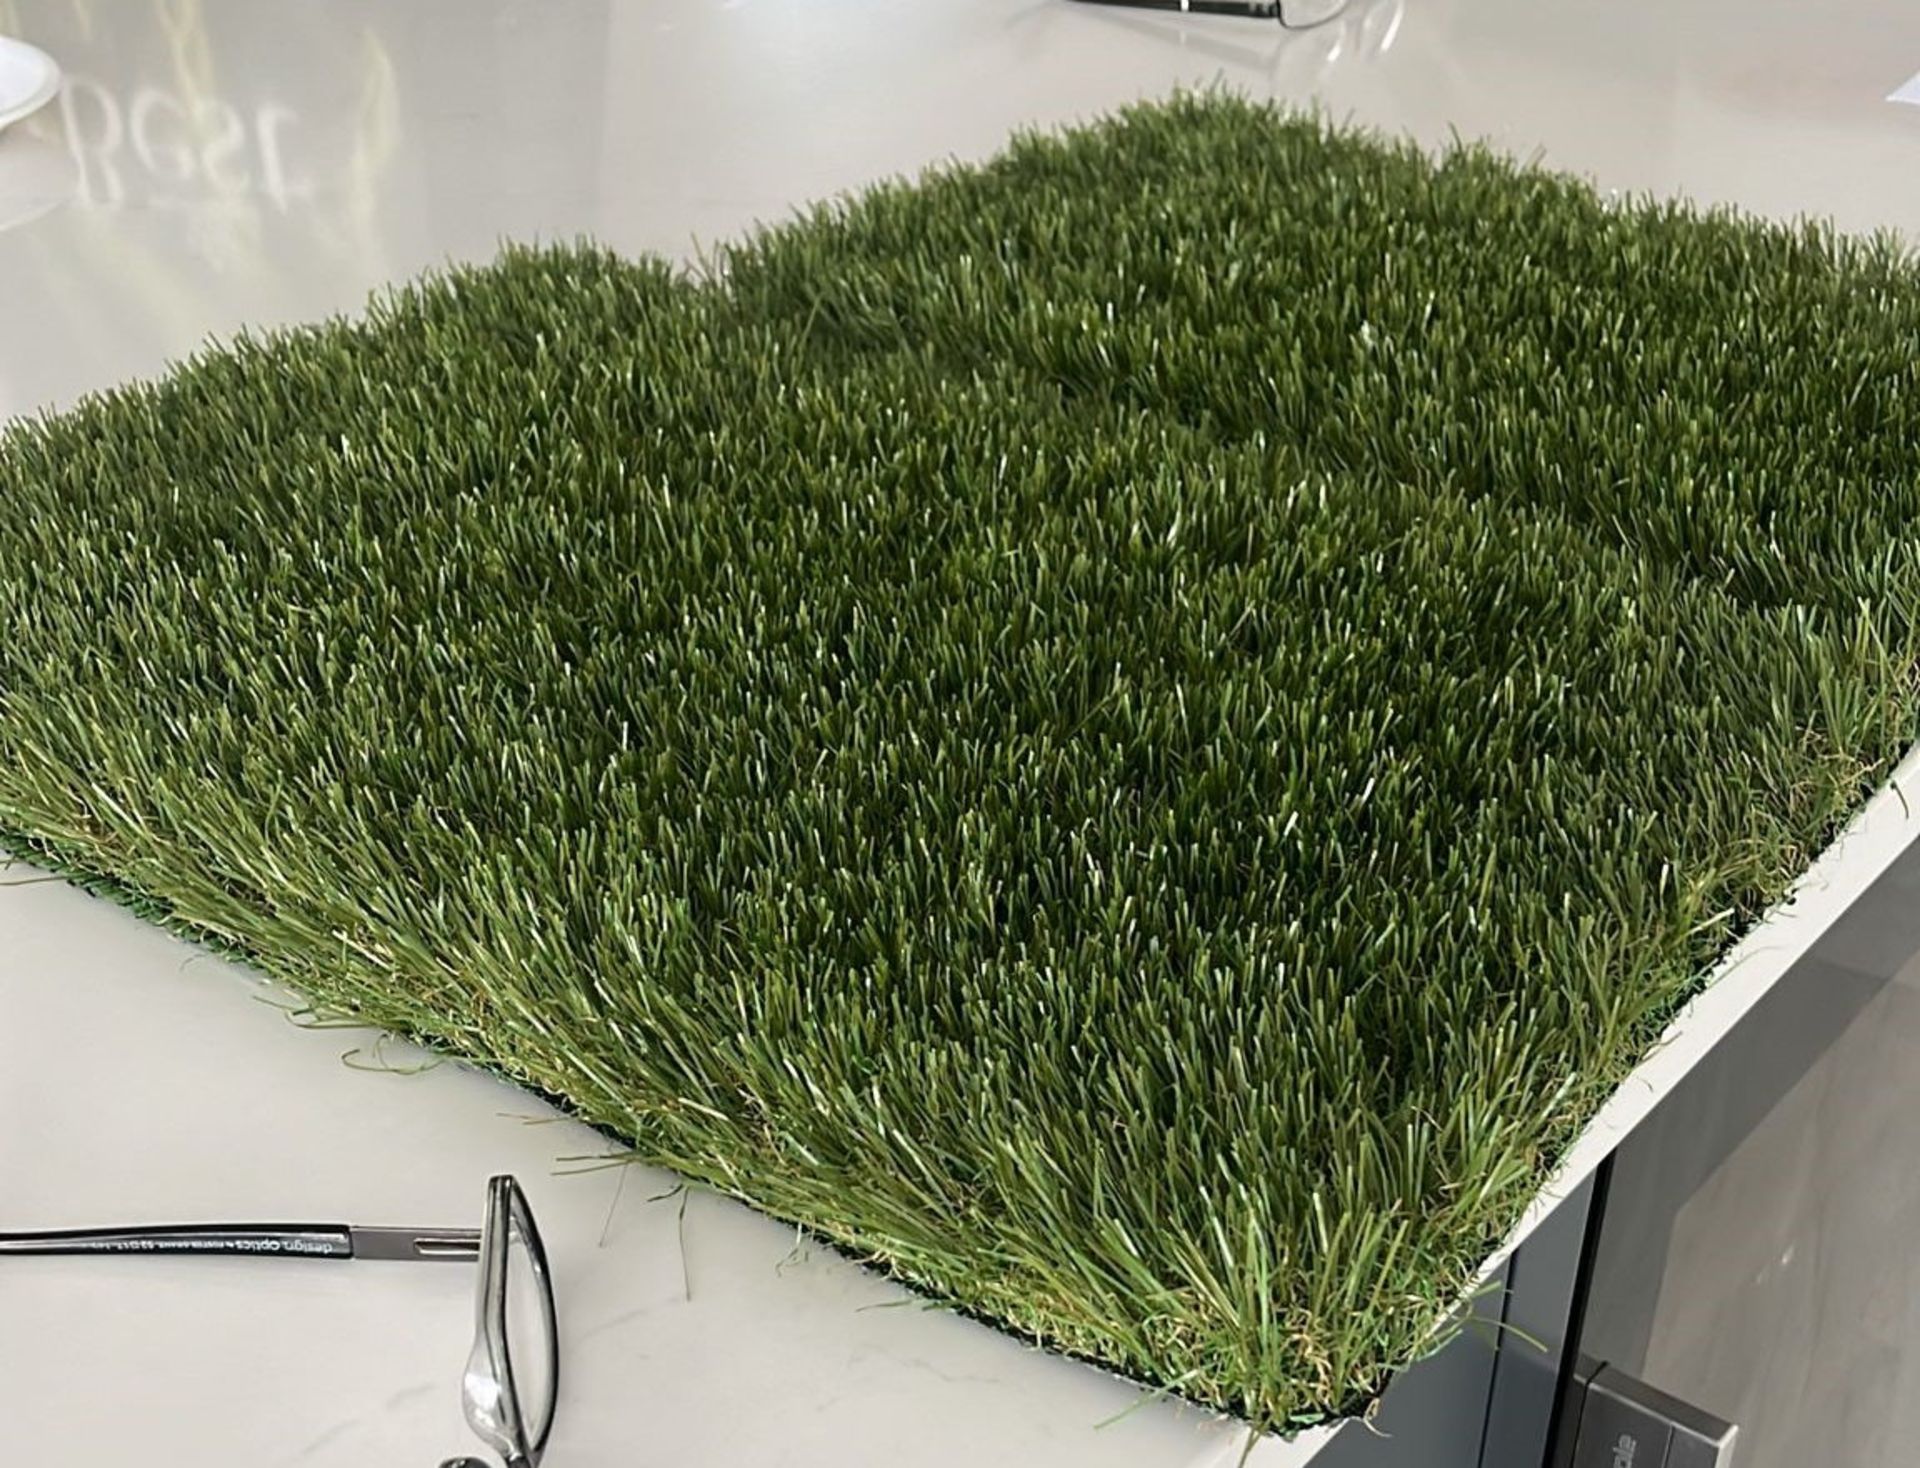 1 x Heavyweight Artificial Garden Grass - 40Mm Thick - 17.5X5M Roll - Rrp £32.99 Per Square - Image 5 of 5